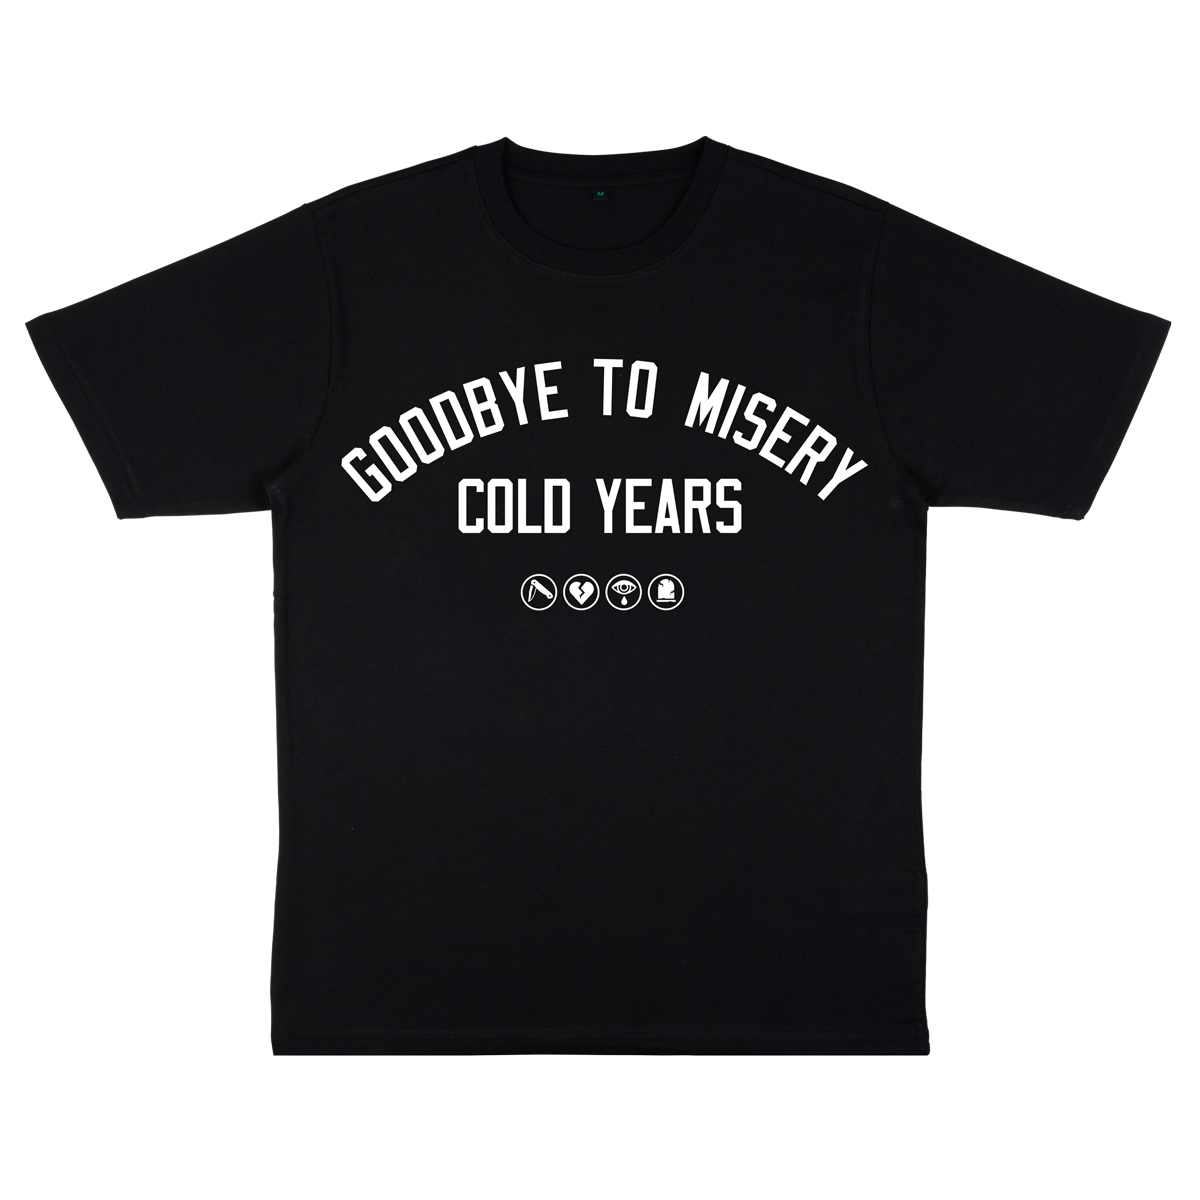 Cold Years - Goodbye to Misery "Varsity" T-Shirt